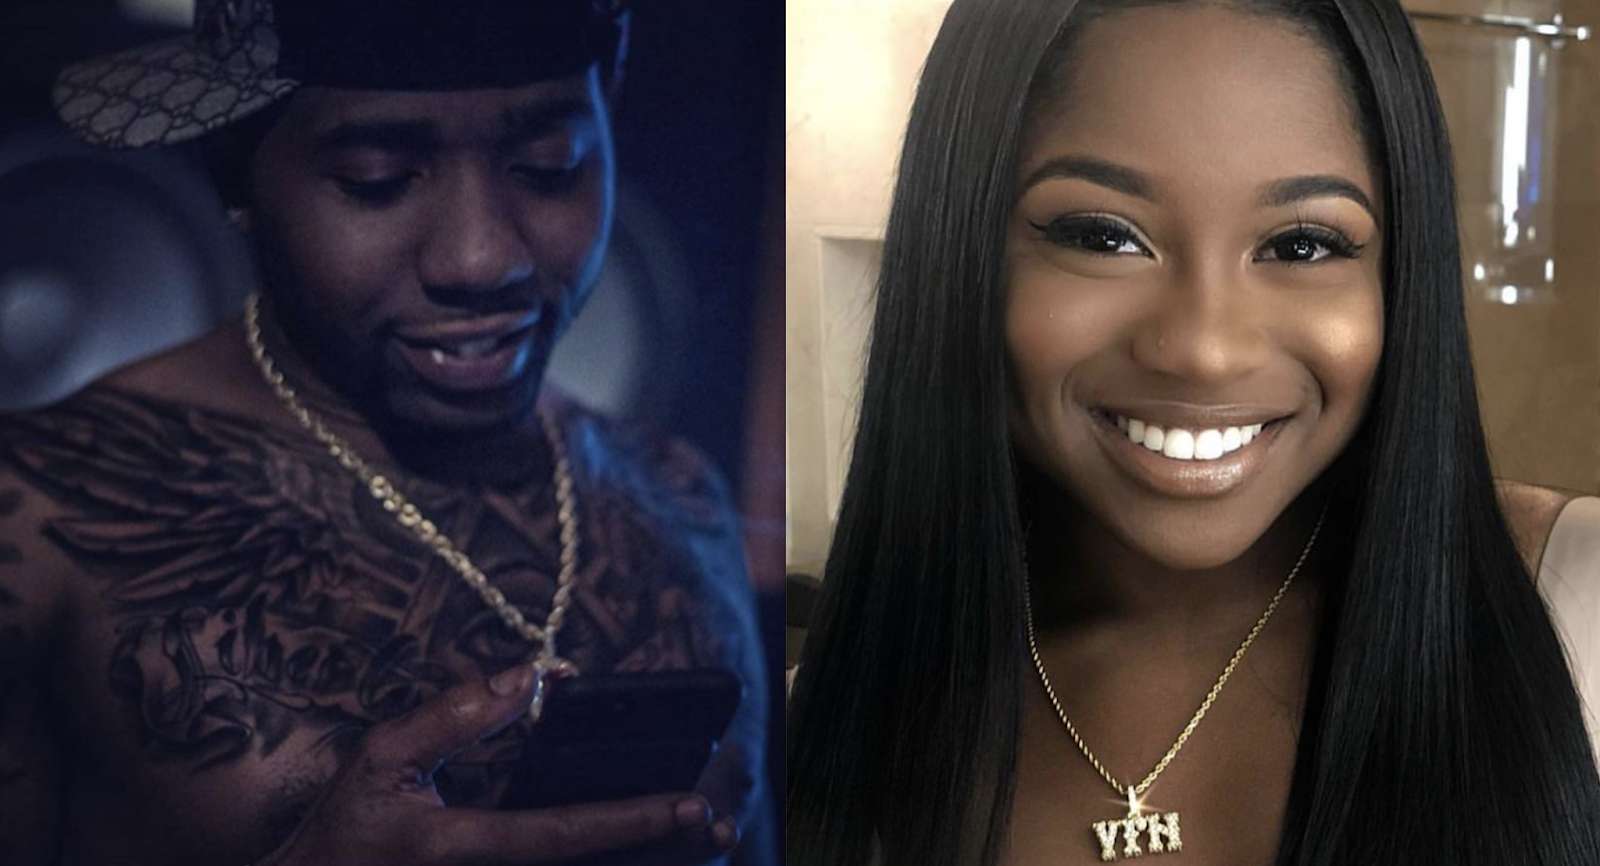 Reginae Carter Makes YFN Lucci's Heart Skip A Beat With This Jaw-Dropping Photo Of Her Beach Body